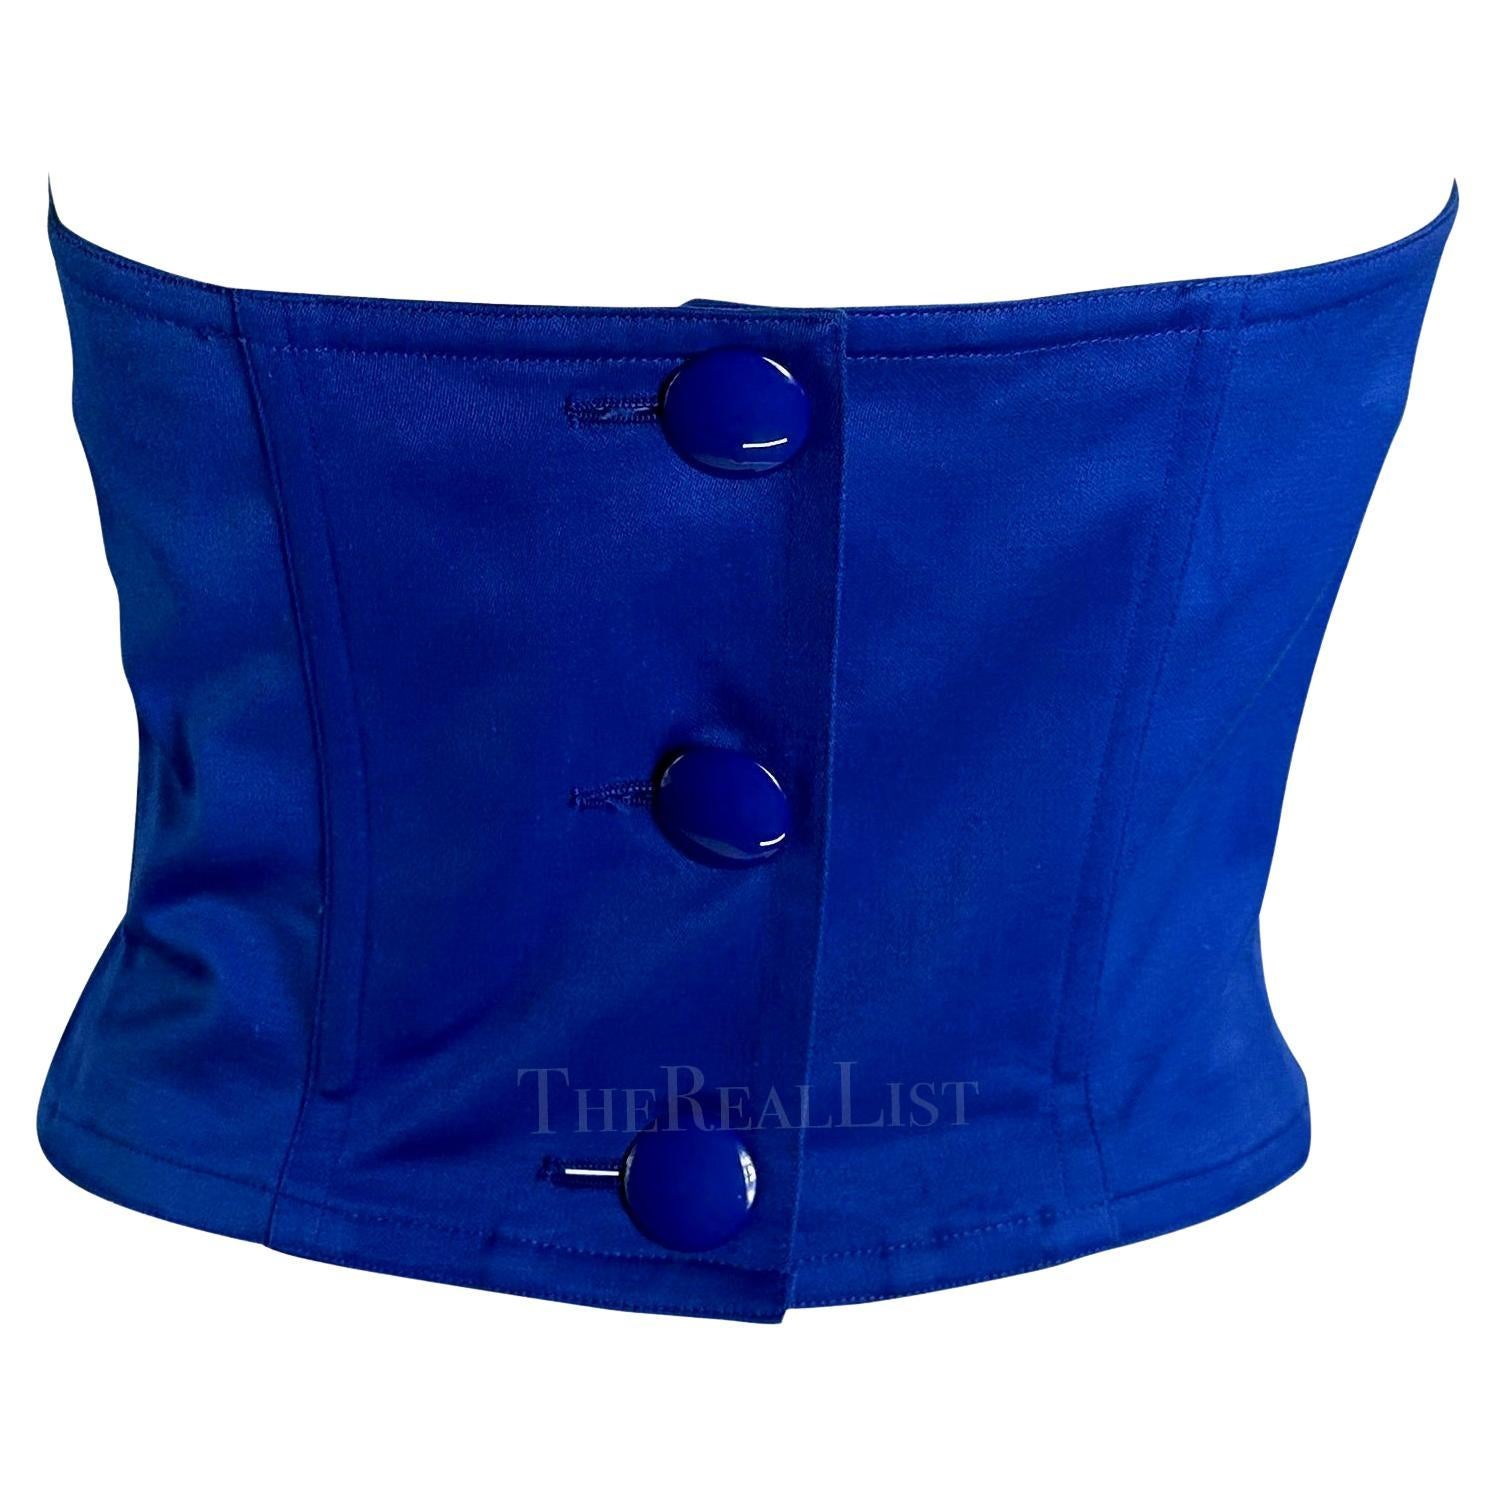 S/S 1988 Yves Saint Laurent Rive Gauche Royal Blue Bustier Boned Crop Top In Good Condition For Sale In West Hollywood, CA